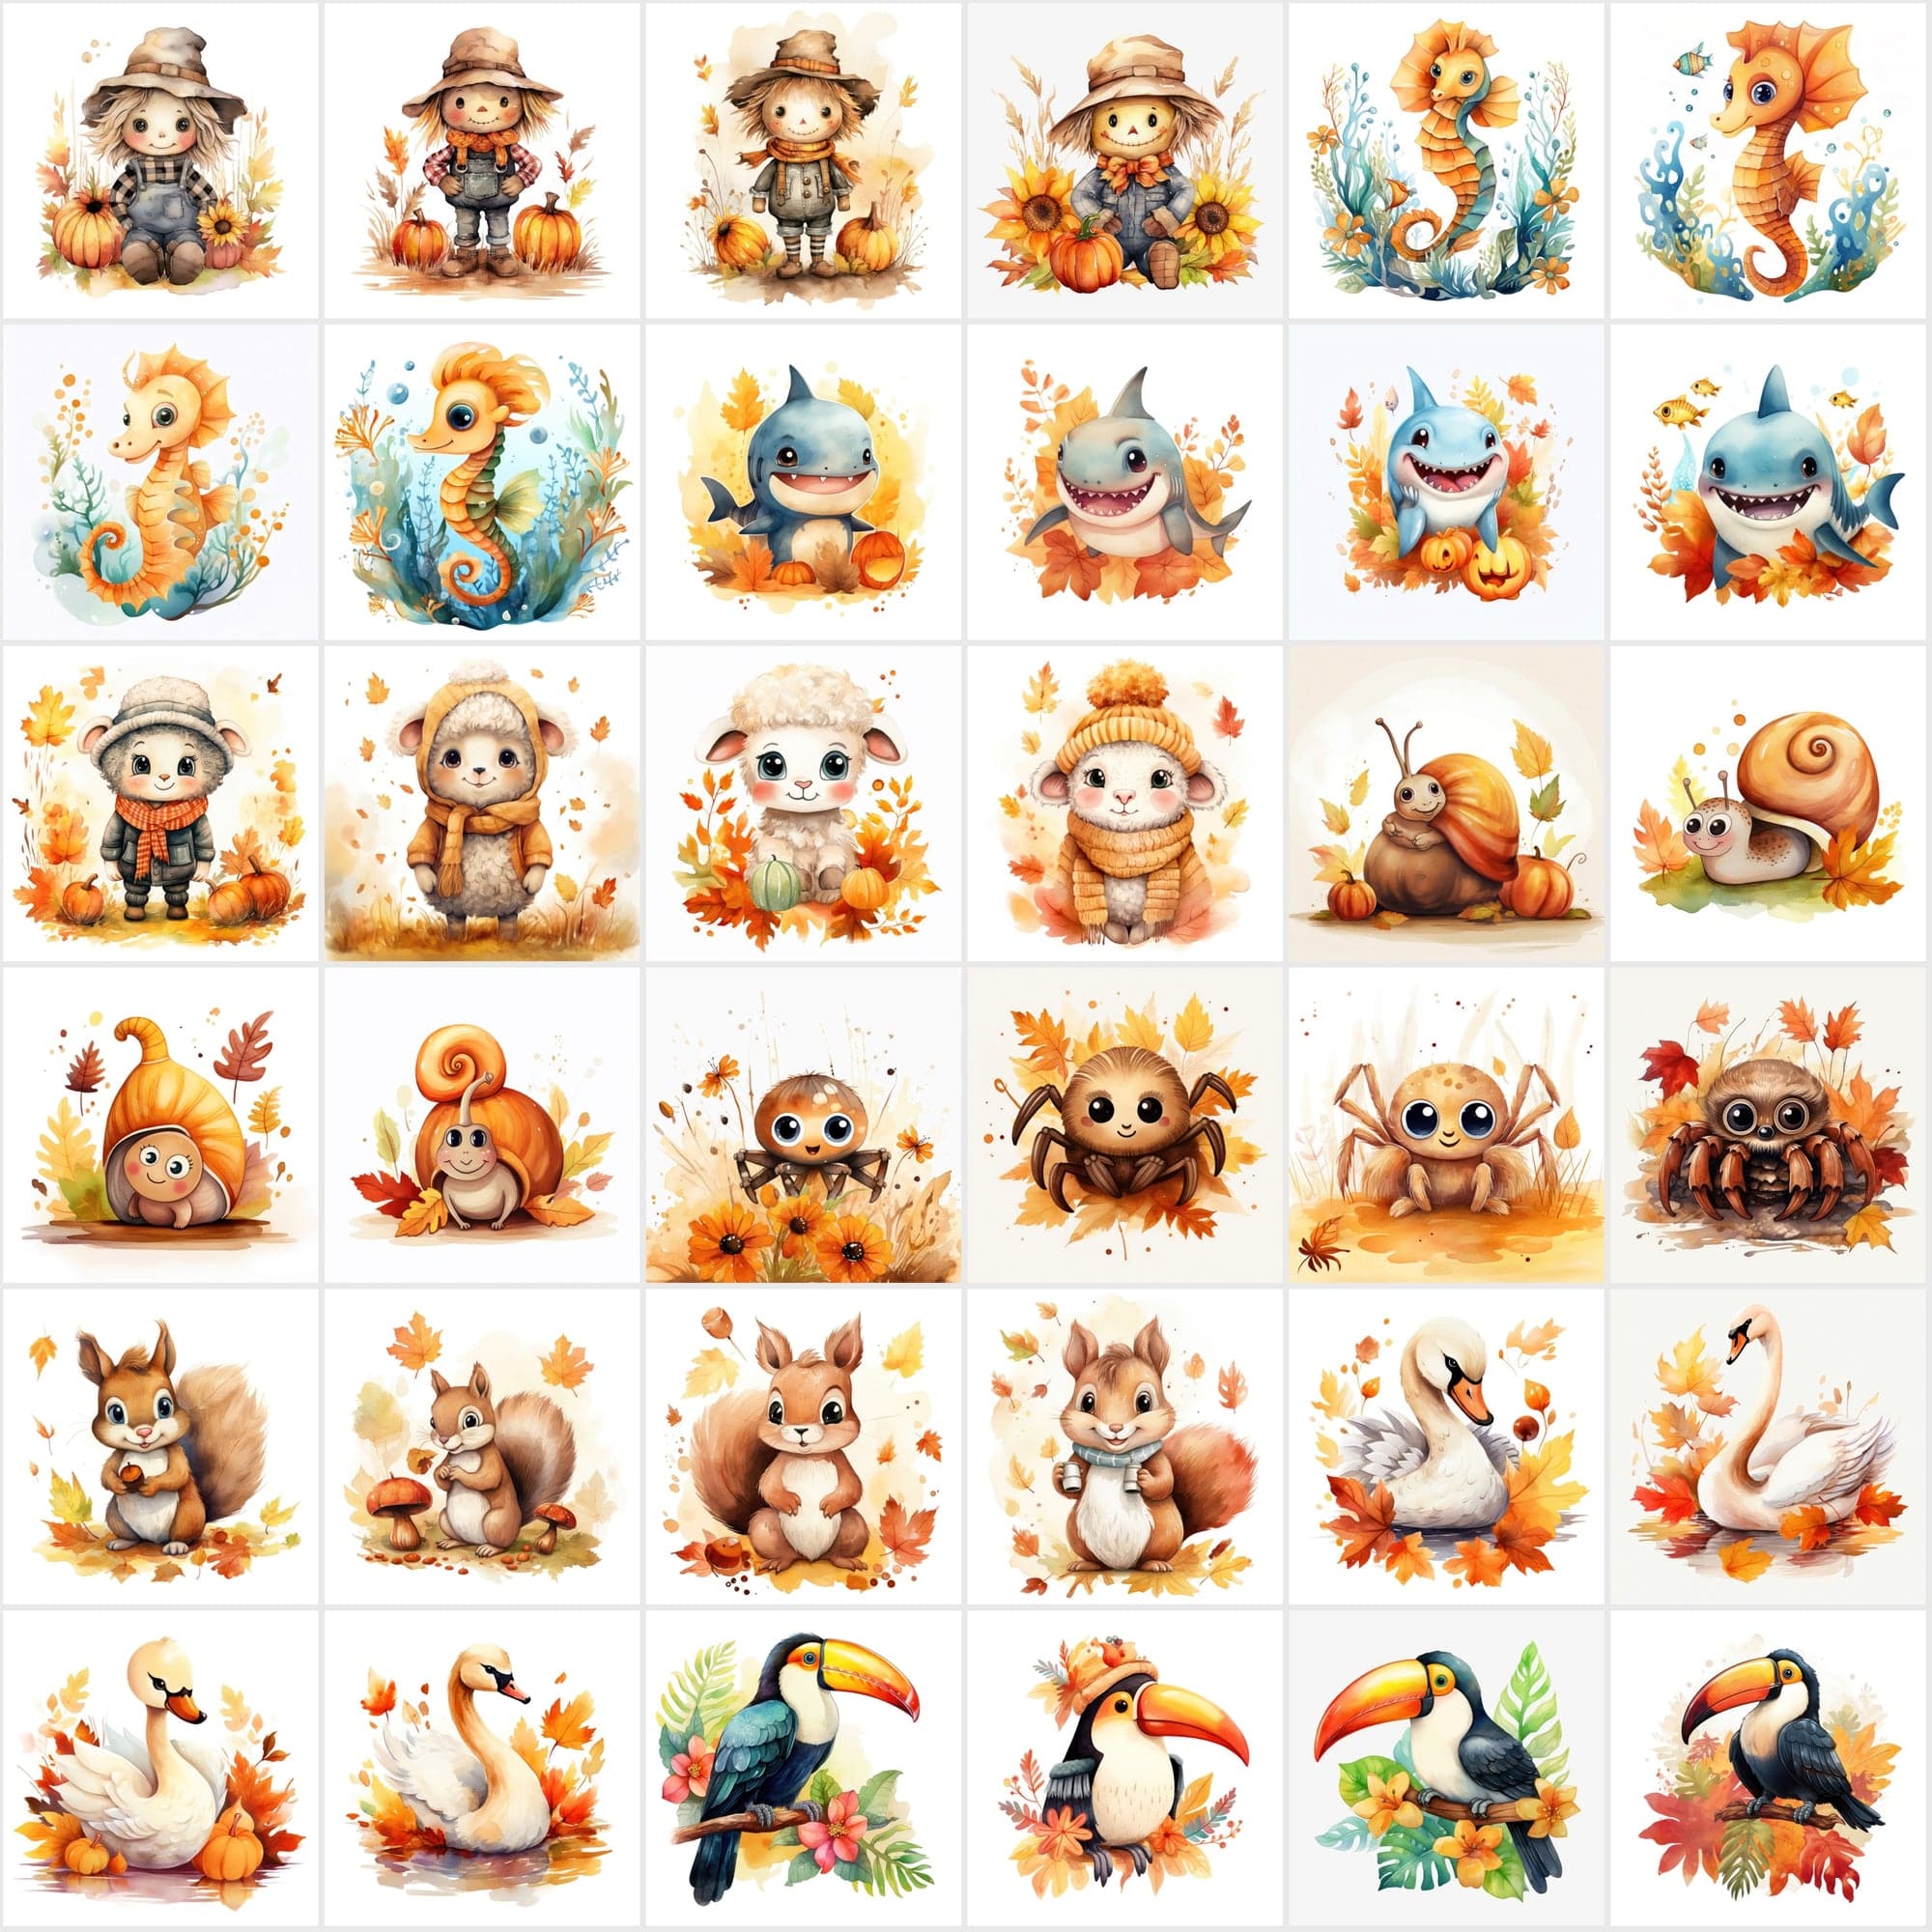 Fall in Love with Autumn: 290 High-Res Animal Illustrations Digital Download Sumobundle